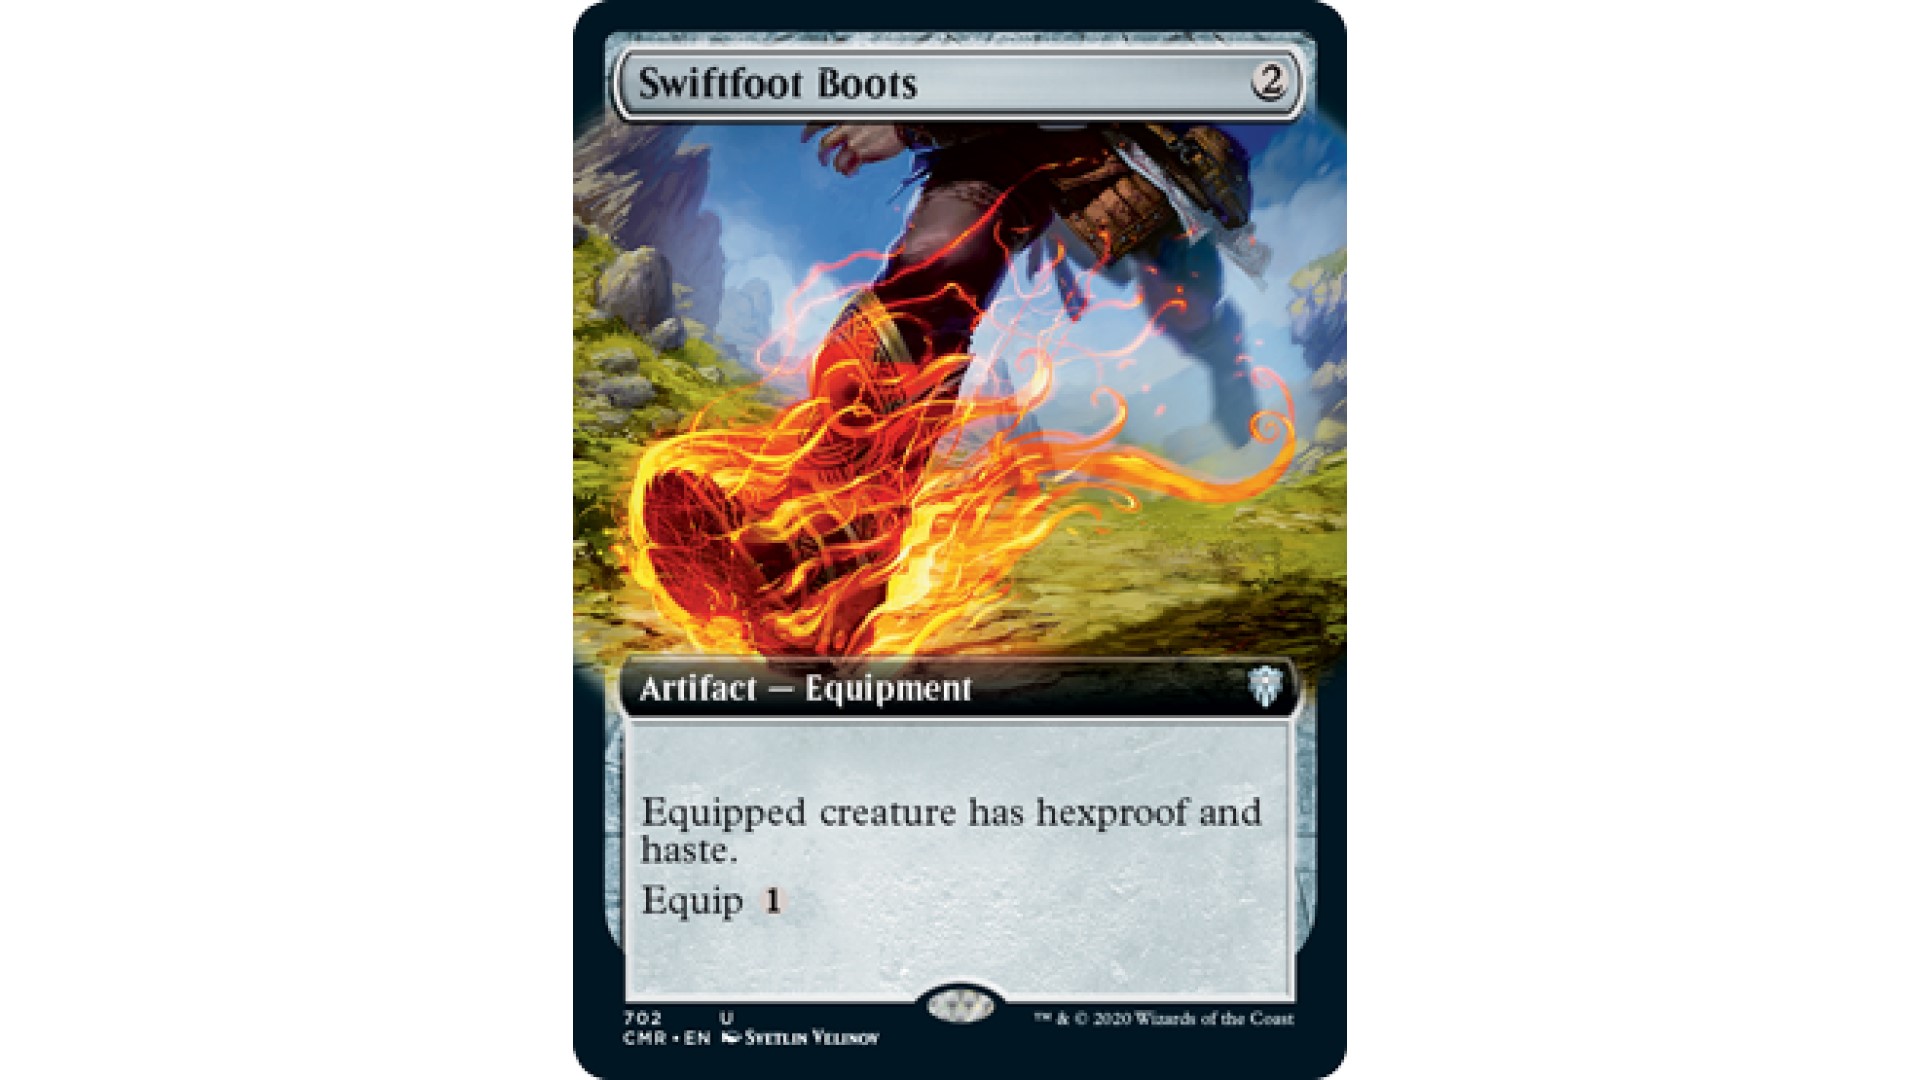 MTG hexproof: The MTG card Swiftfoot Boots